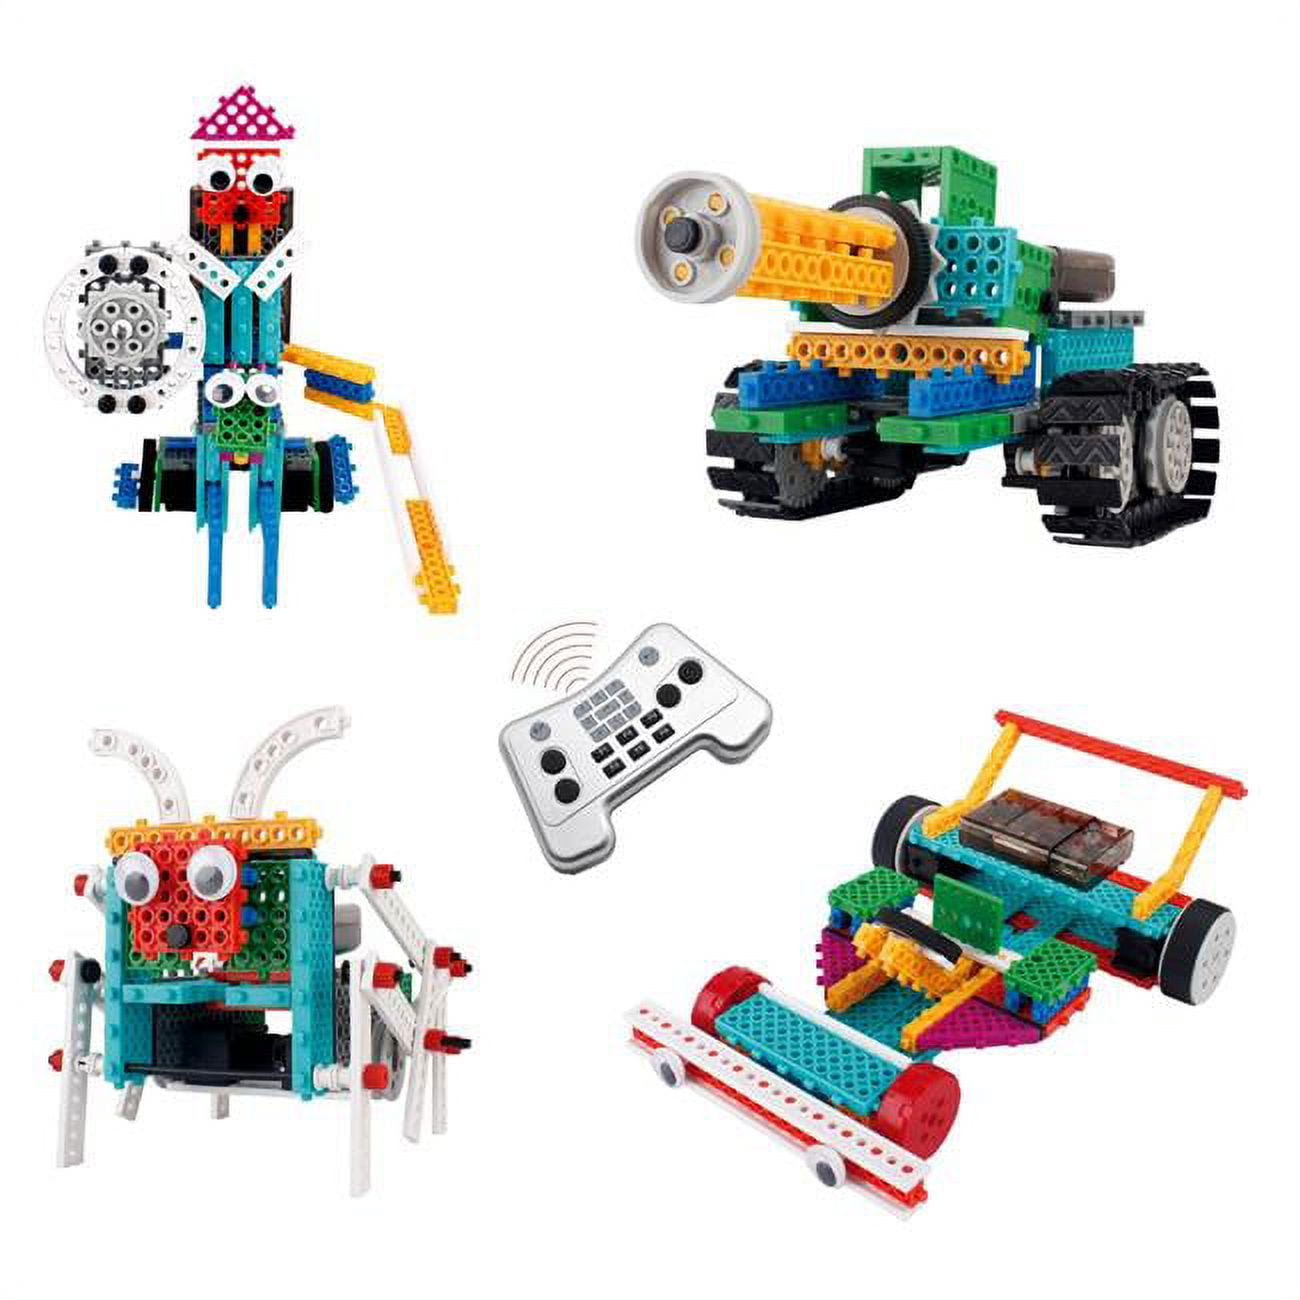 Pb721 Remote Control Building Kits, Remote Control Machine Educational Learning Robot Kits For Kids Children For Fun - 237 Piece